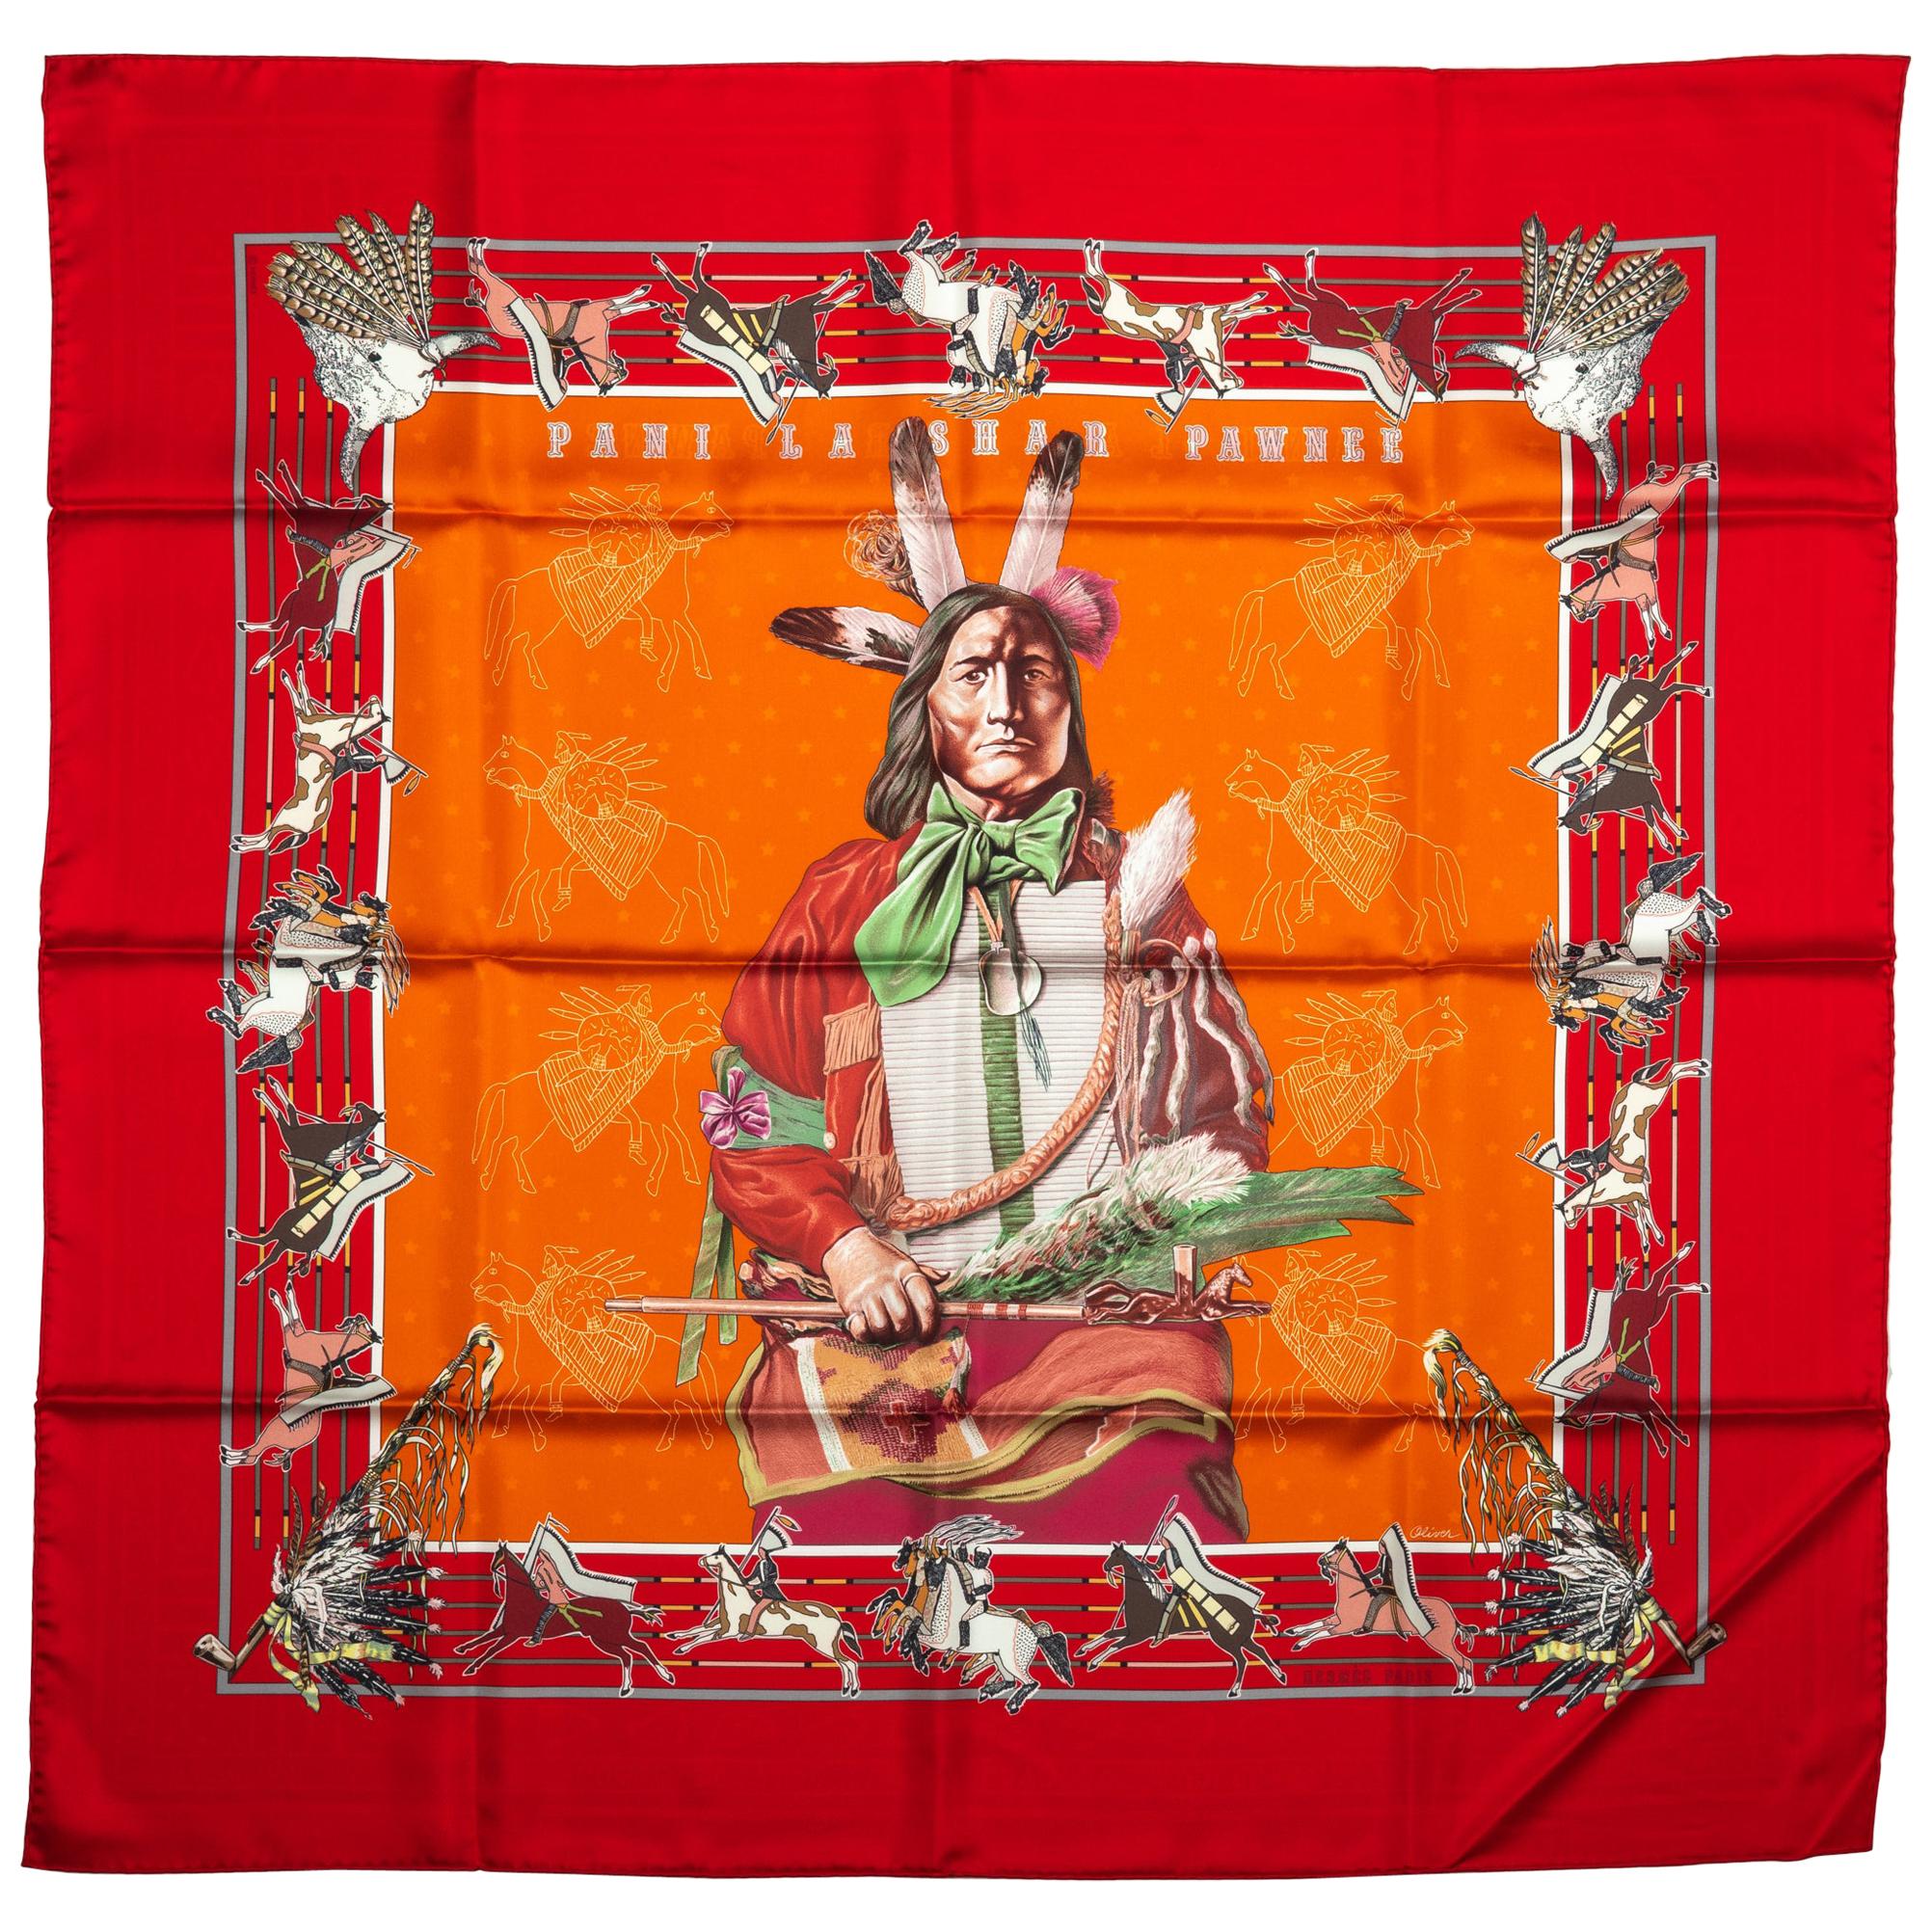 New in Box Hermes Pawnee Bandana Limited Edition Scarf  For Sale